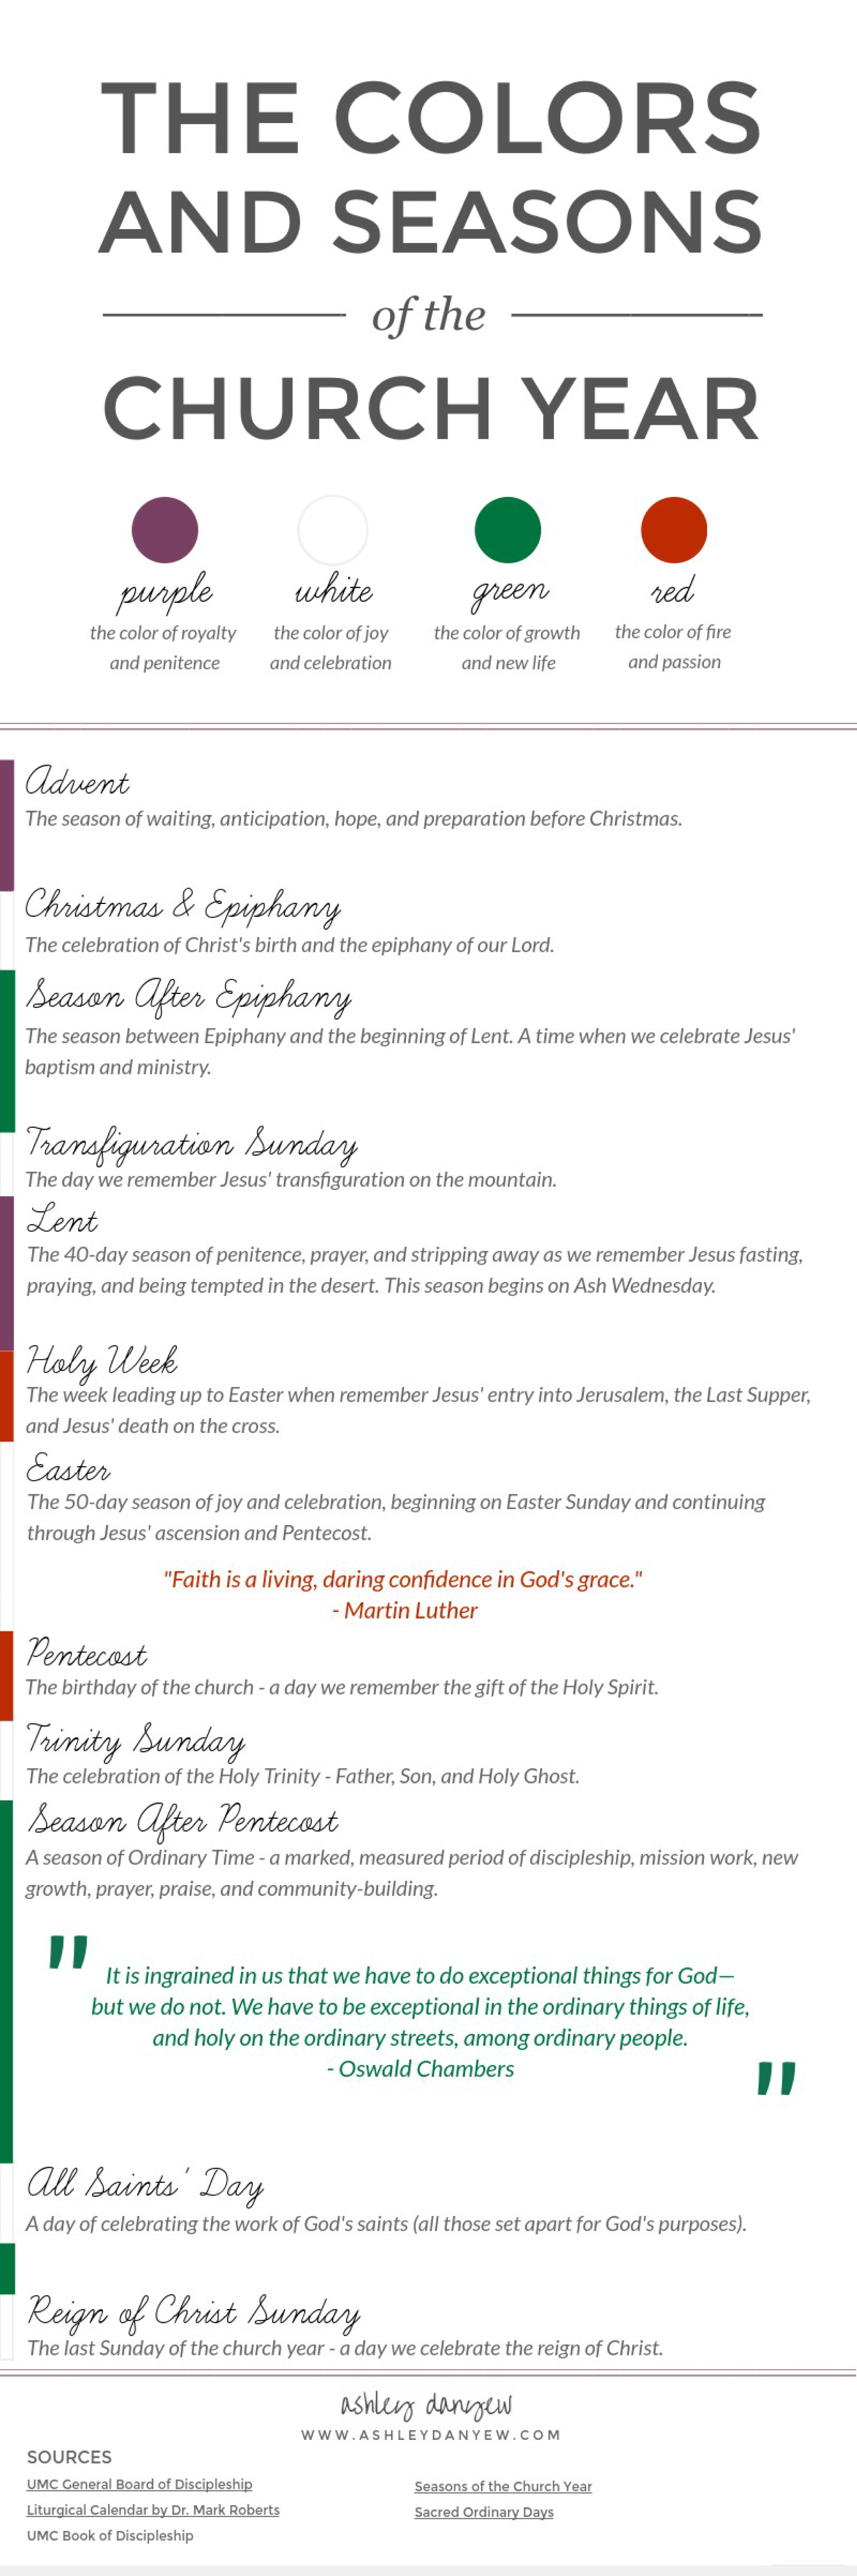 Copy of The Colors and Seasons of the Church Year